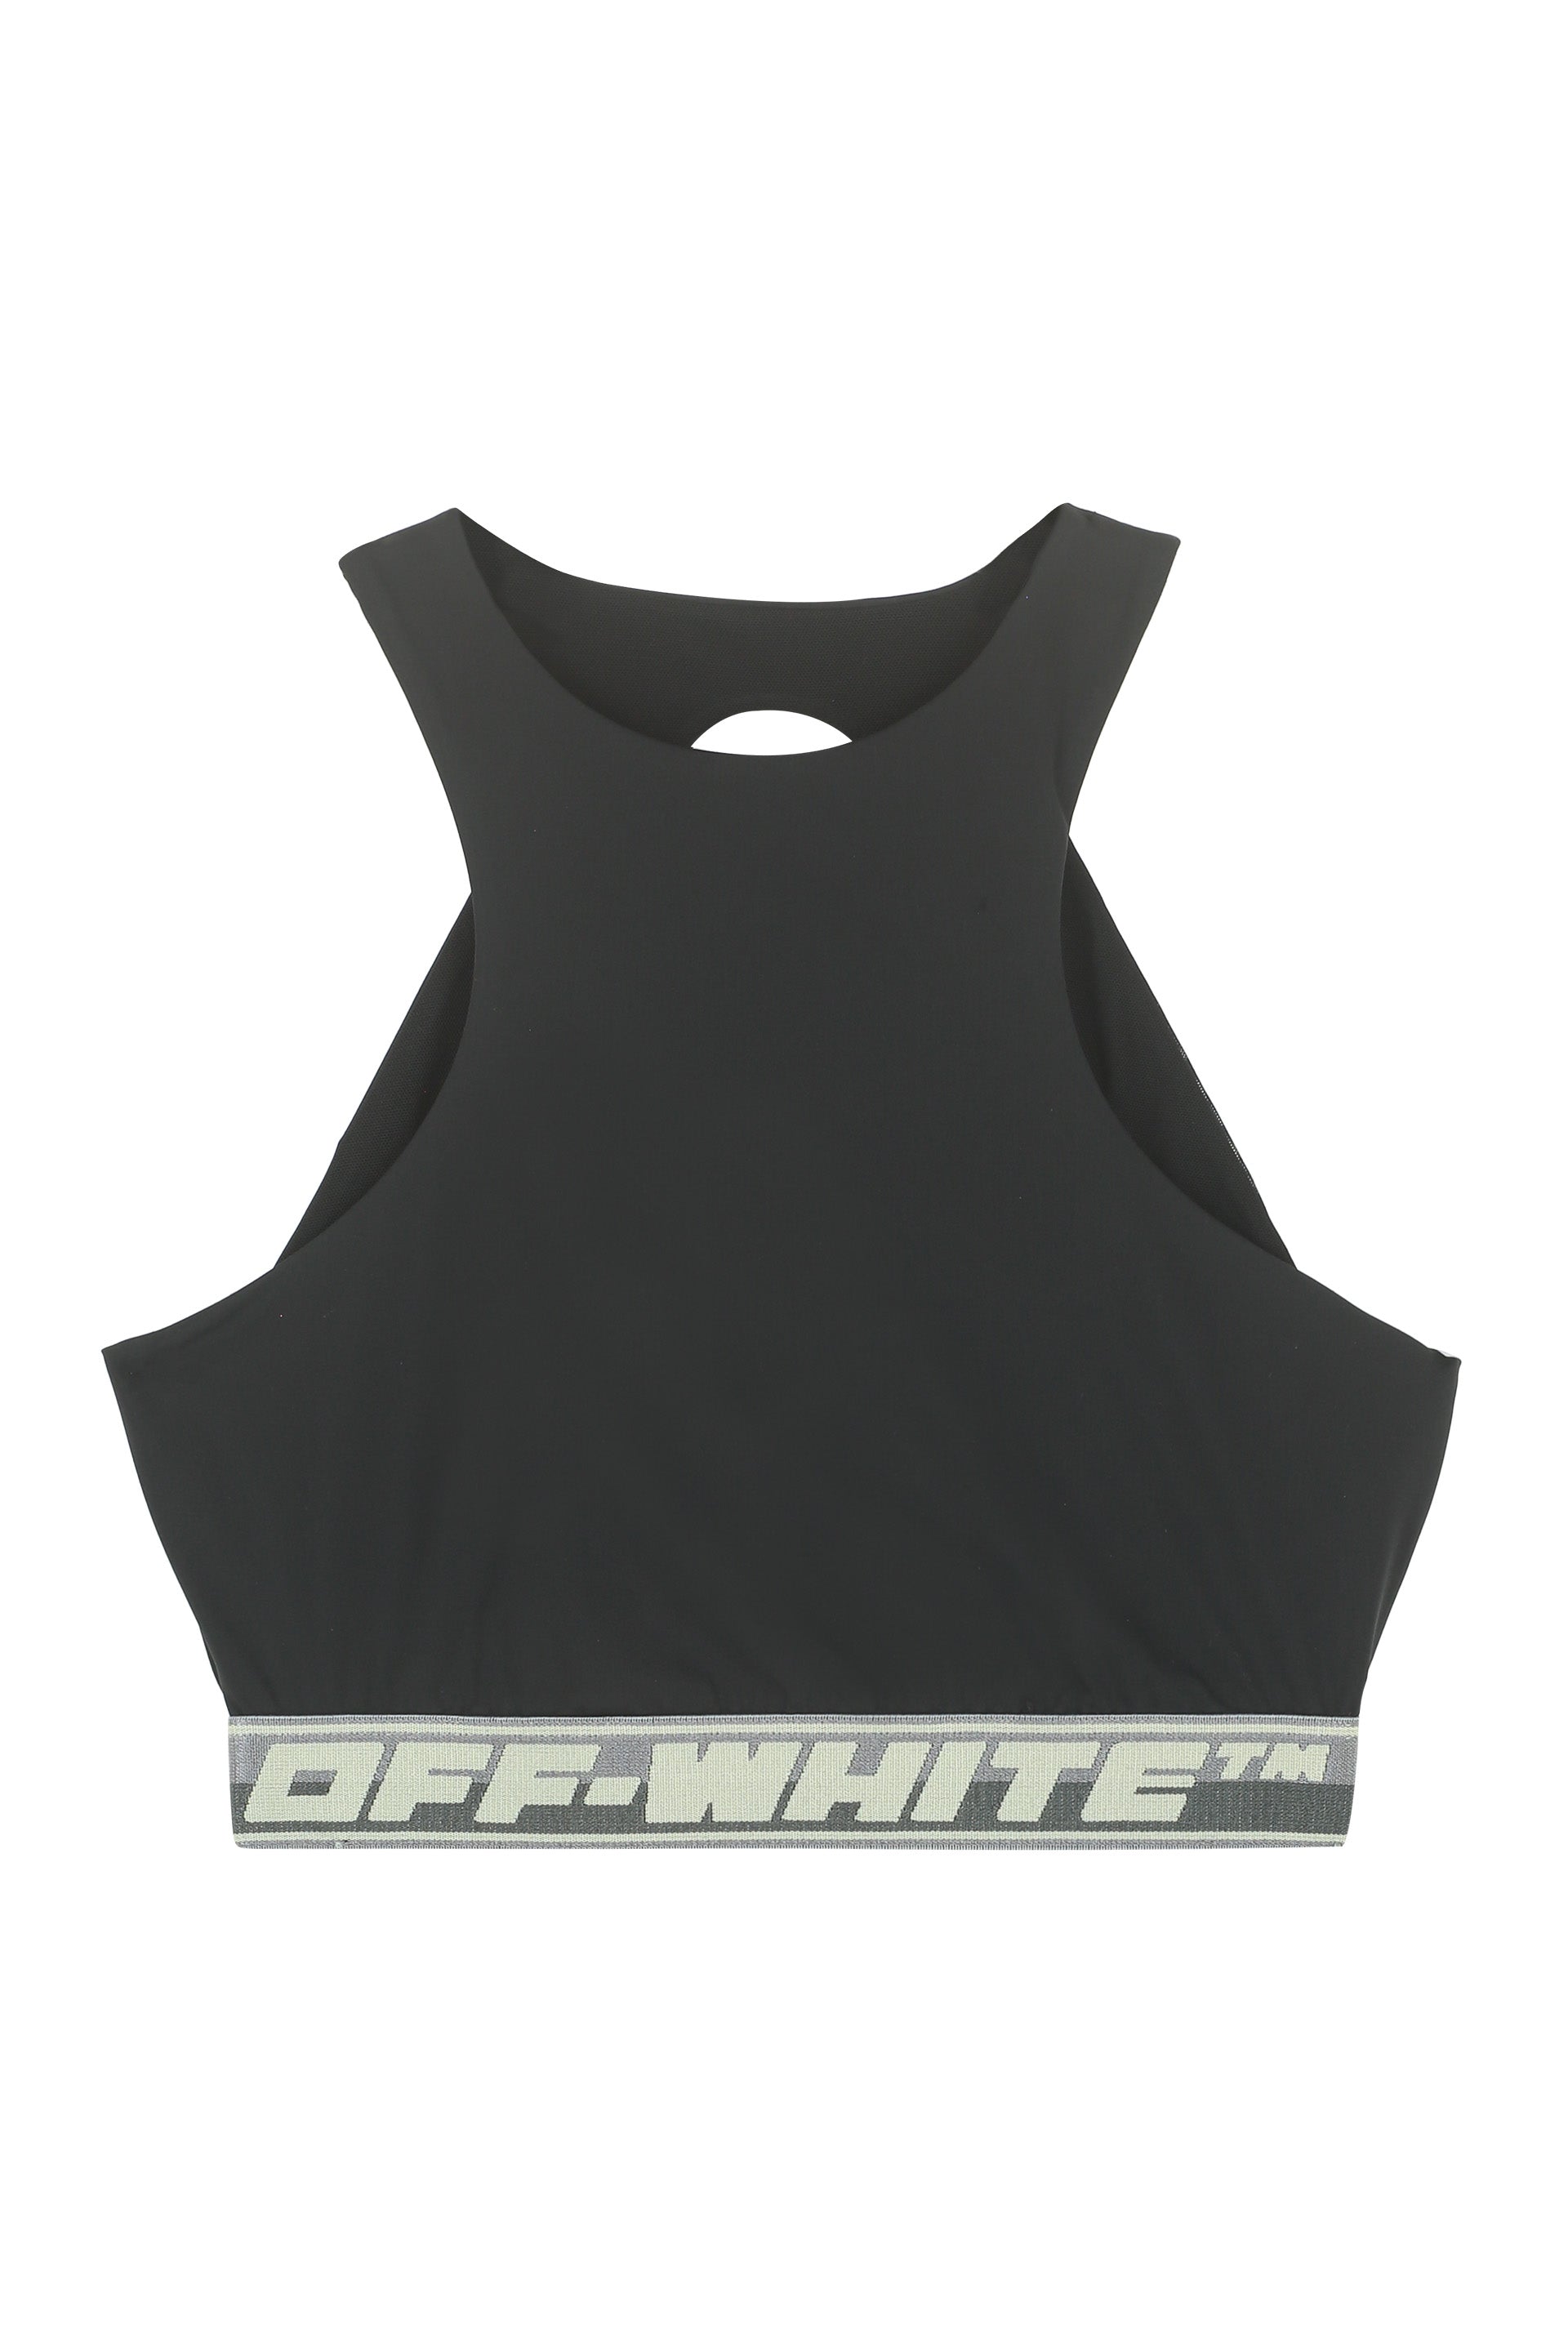 Off-White-OUTLET-SALE-Techno-fabric-top-Shirts-38-ARCHIVE-COLLECTION.jpg